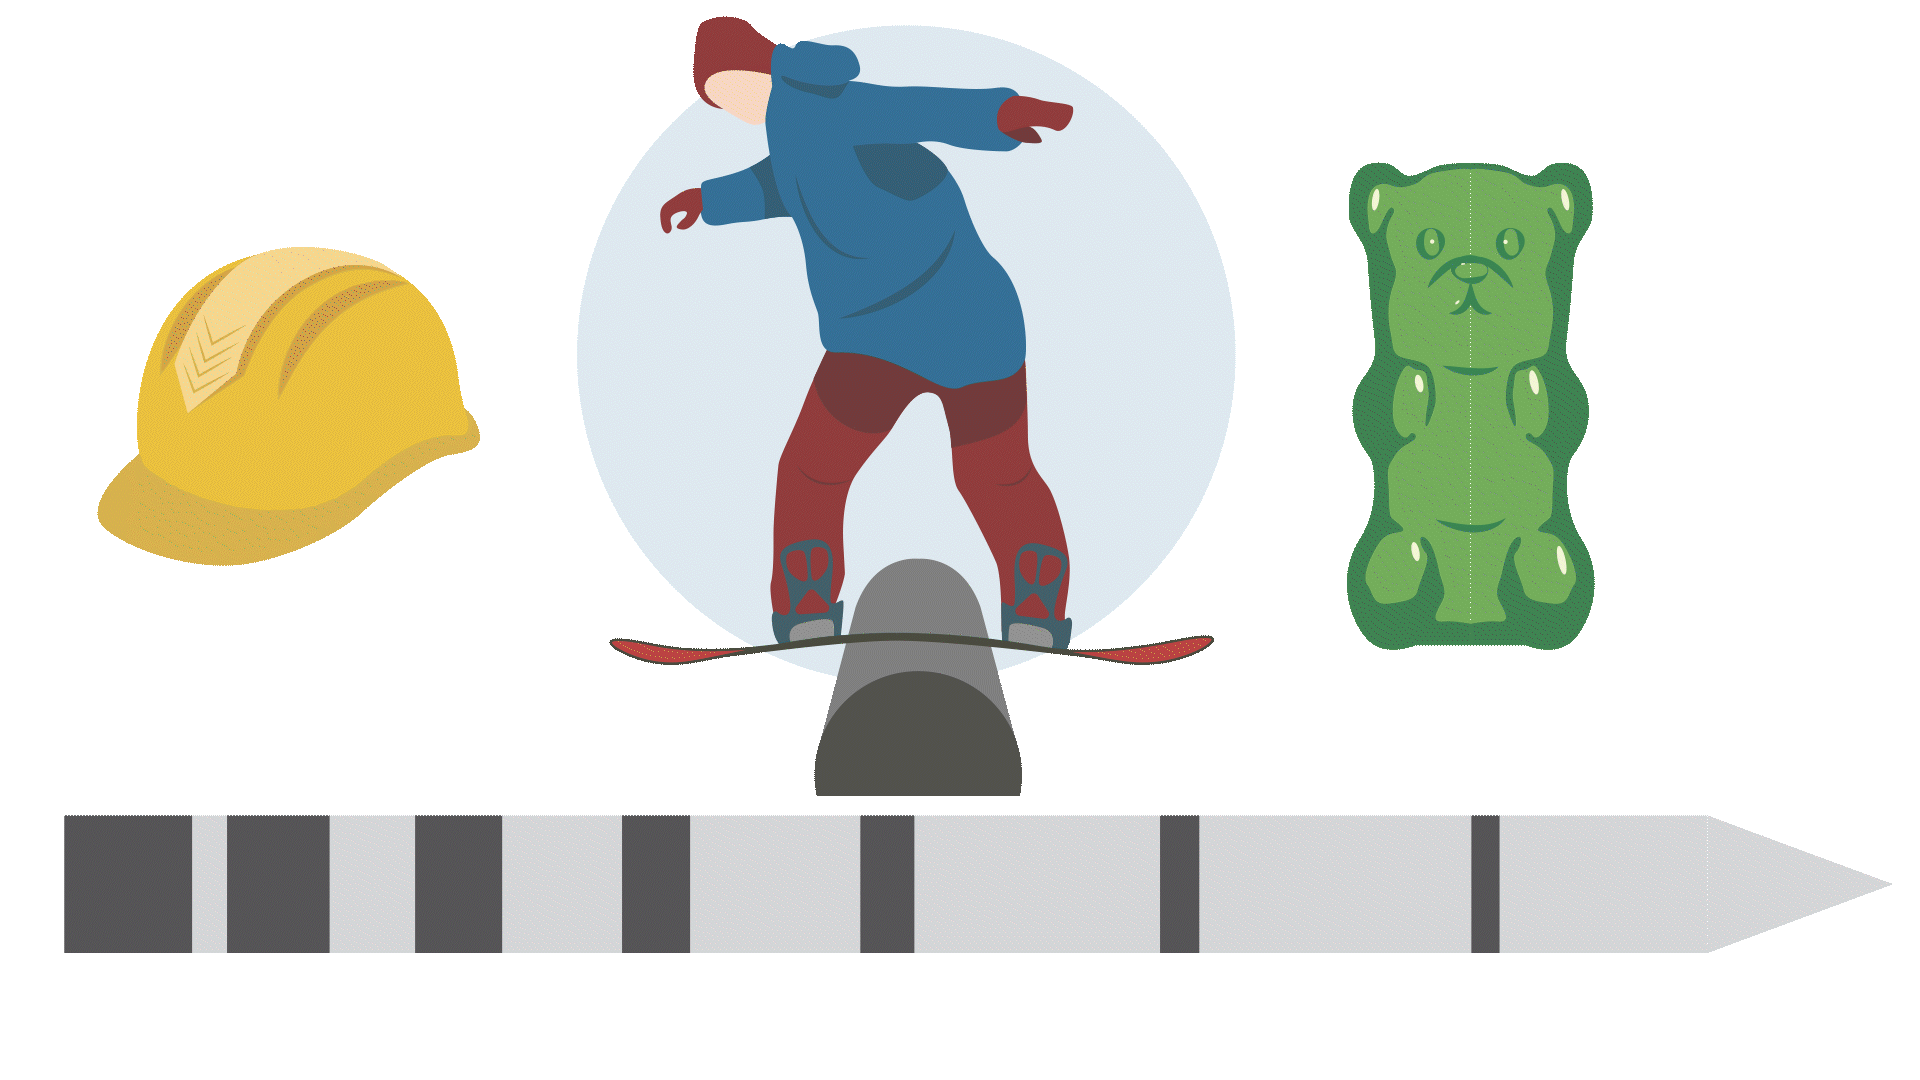 Text: Scale of elasticity. Scale alternates between different sized dark and light grey sections. Above the scale are 3 images. First is a yellow hard-hat with text Withstands impact and High hardness. Second is a blue circle with person snowboarding on a curved ramp, in blue and red snow-suit with text Doesn't hold deformed shape and Bounces back. Third is a green gummy bear with text Can't go back to the original shape after deformations and Easy to deform.